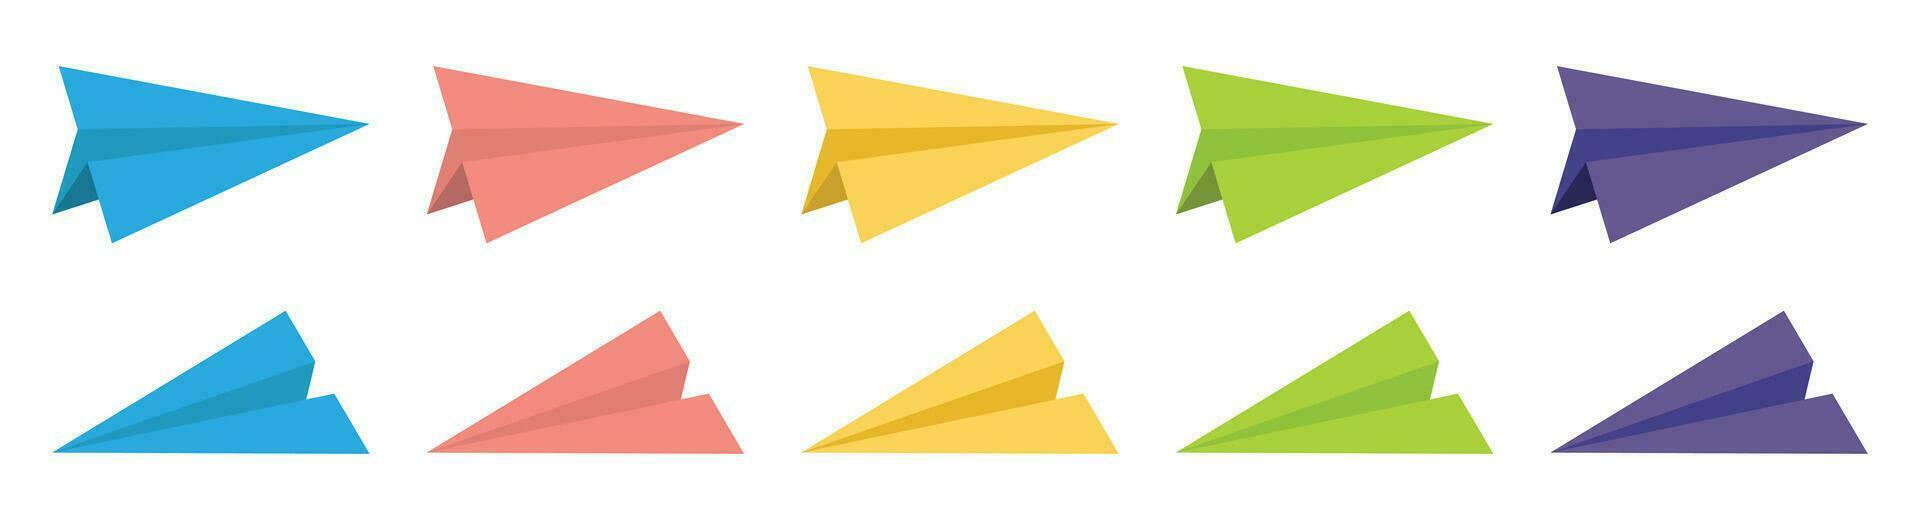 Colored paper airplane collection vector illustration